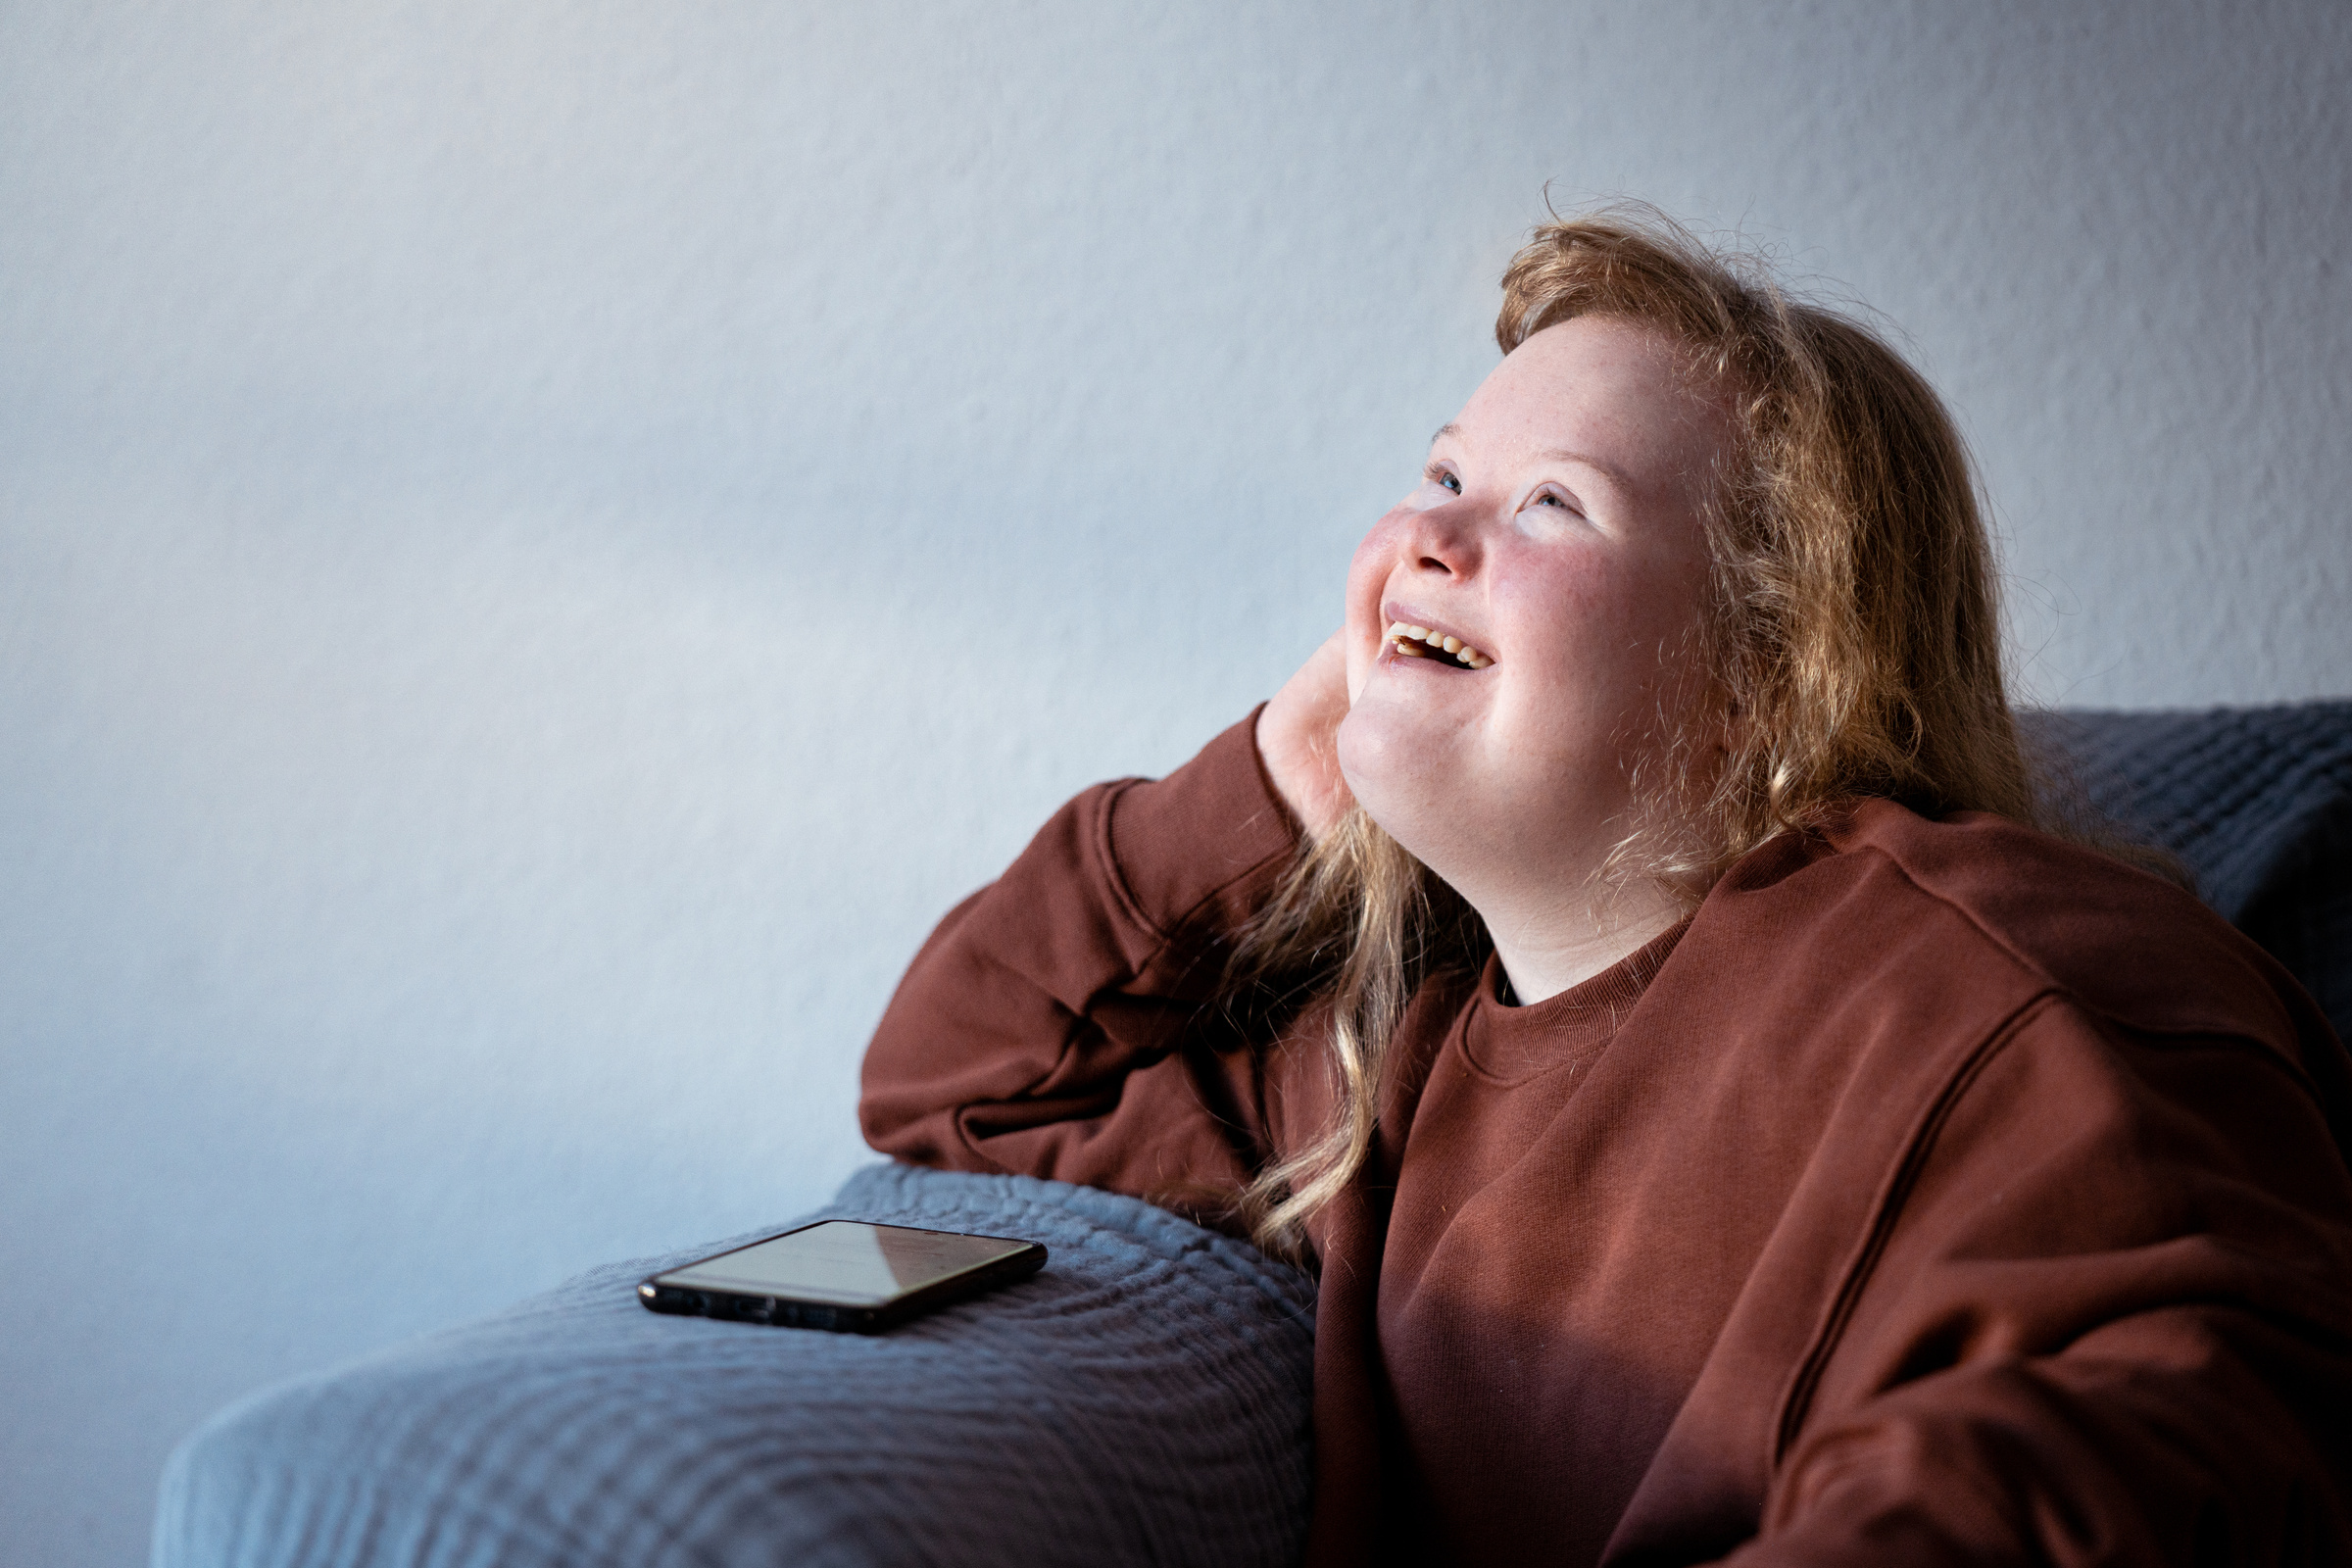 Teen Girl with Down Syndrome with Smartphone